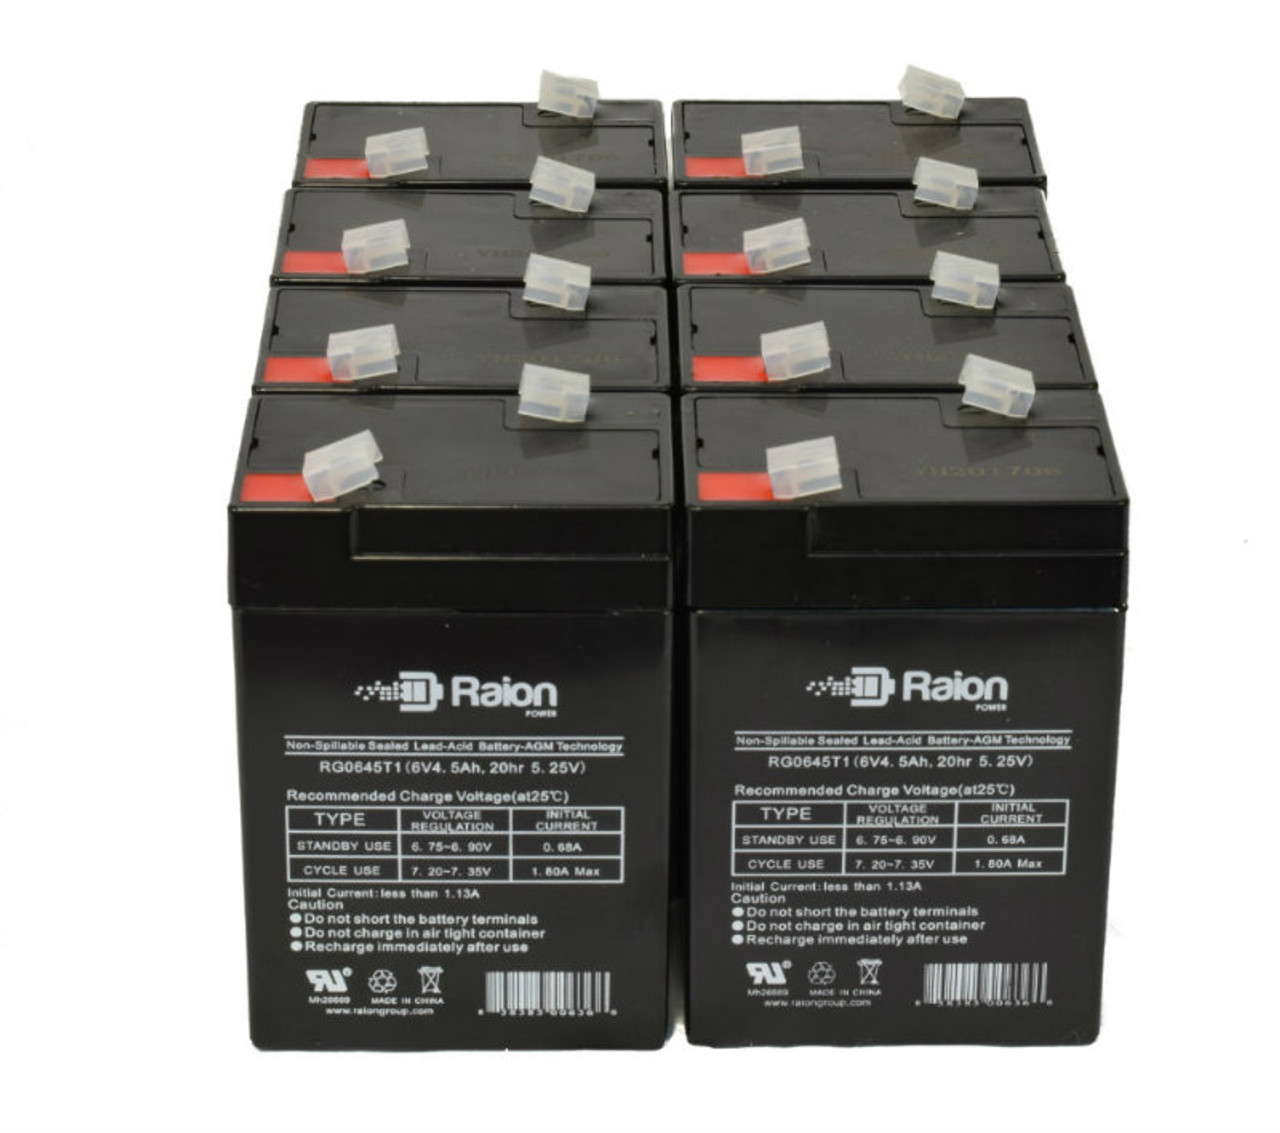 Raion Power RG0645T1 6V 4.5Ah Replacement Medical Equipment Battery for Ohio 504Us Pulse Oximeter - 8 Pack